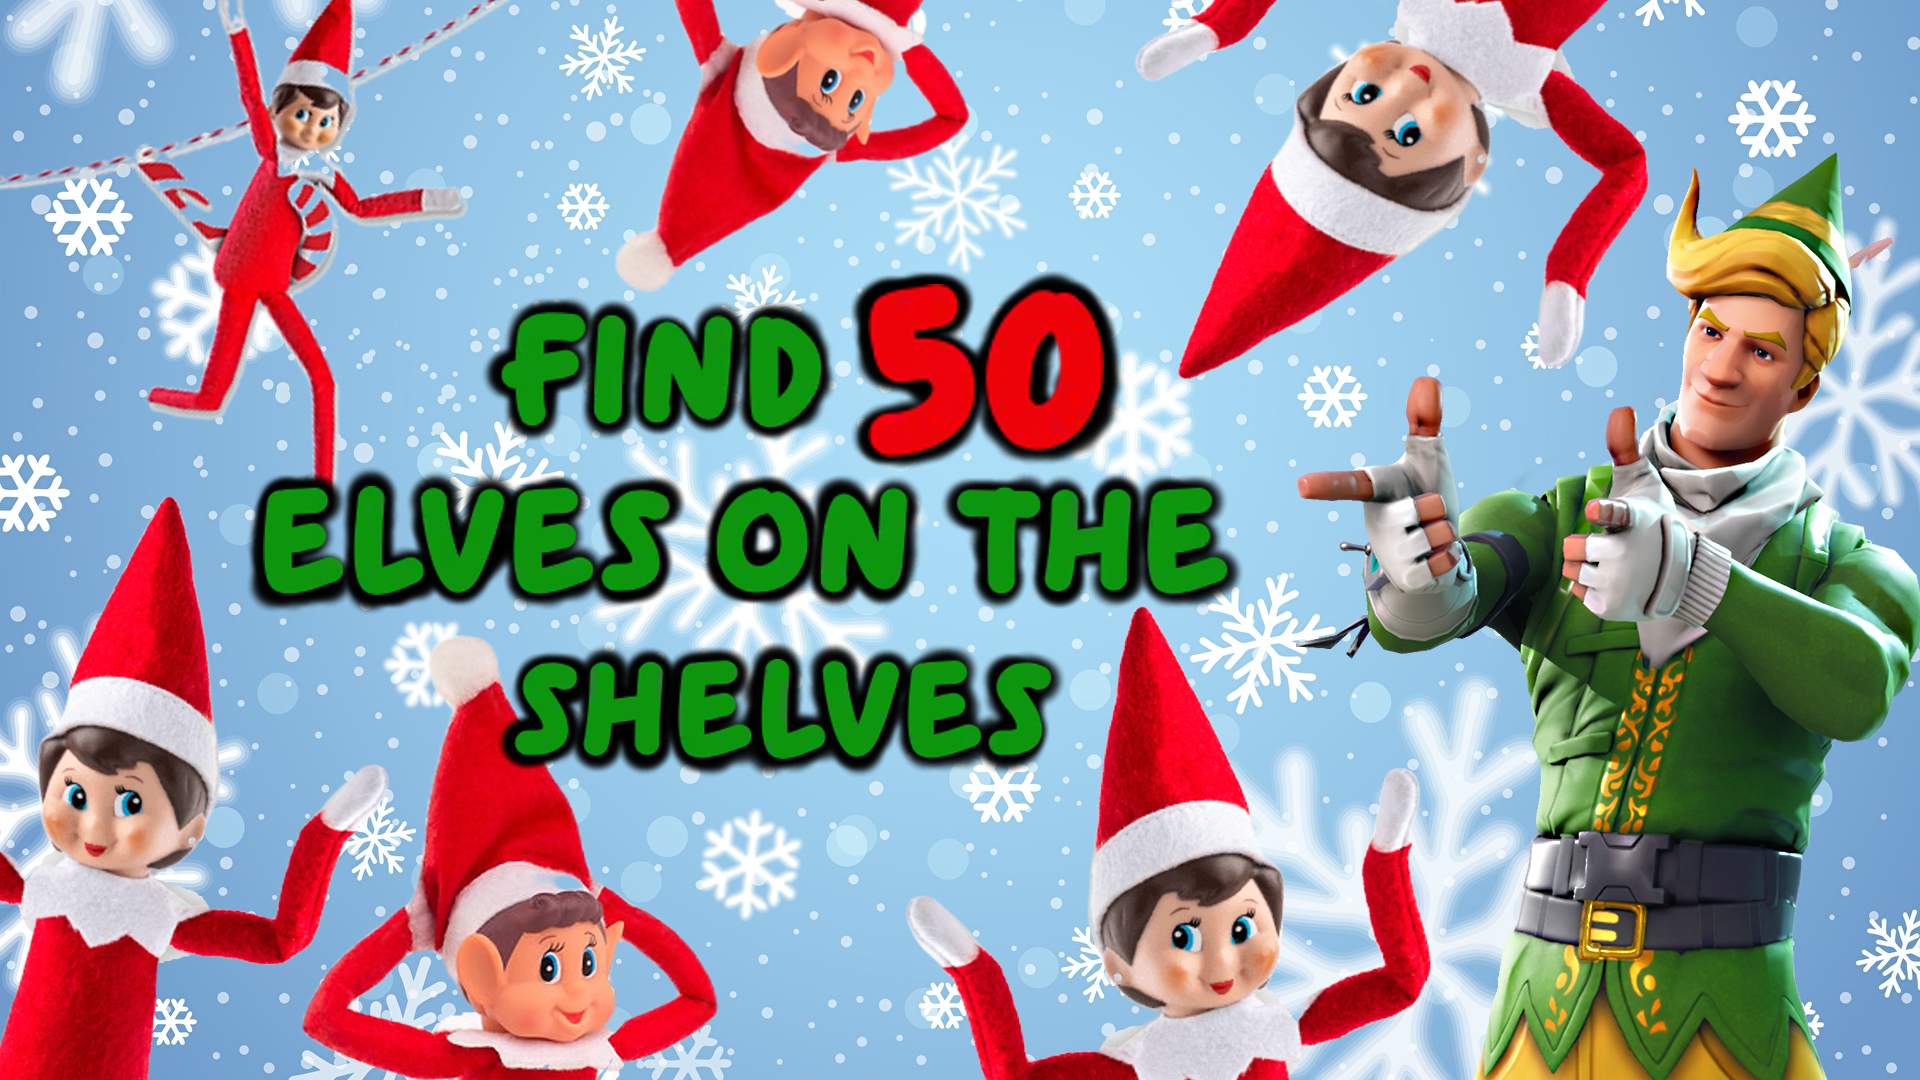 FIND THE ELF ON THE SHELF!